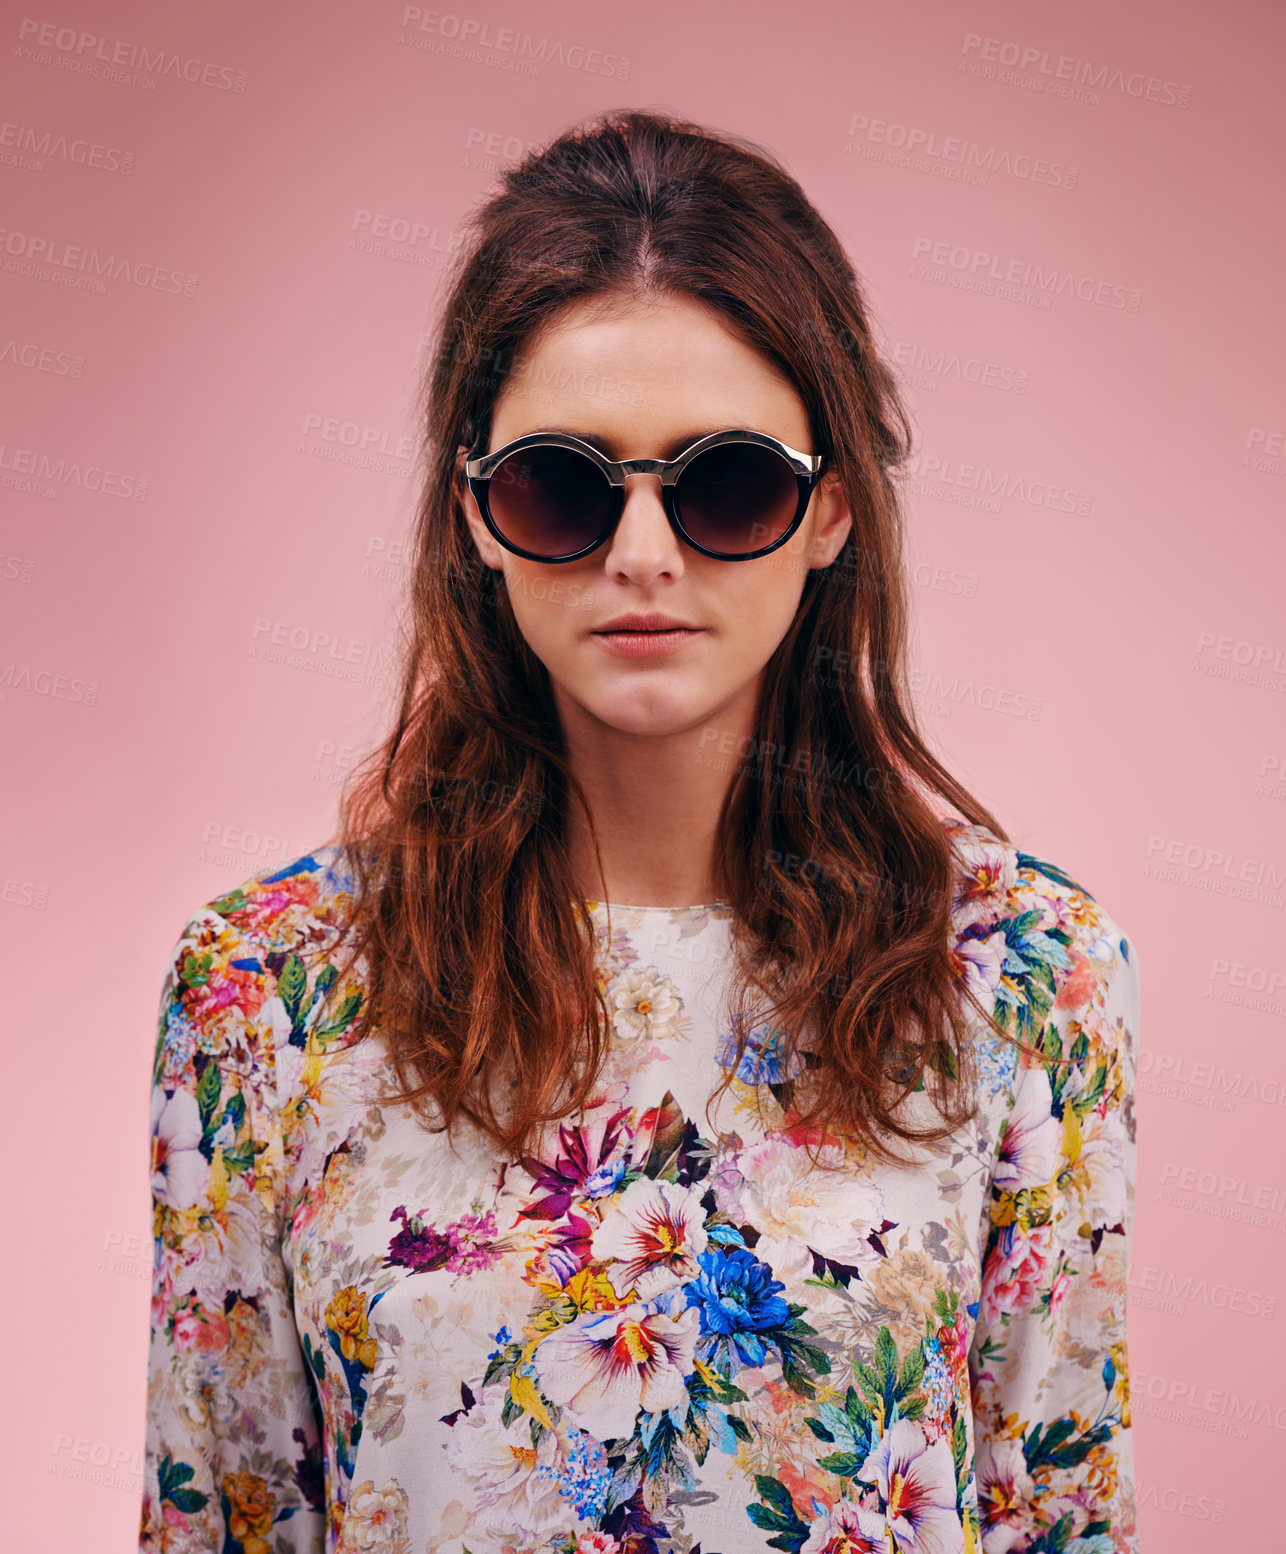 Buy stock photo Portrait of an attractive young woman wearing designer shades against a pink background